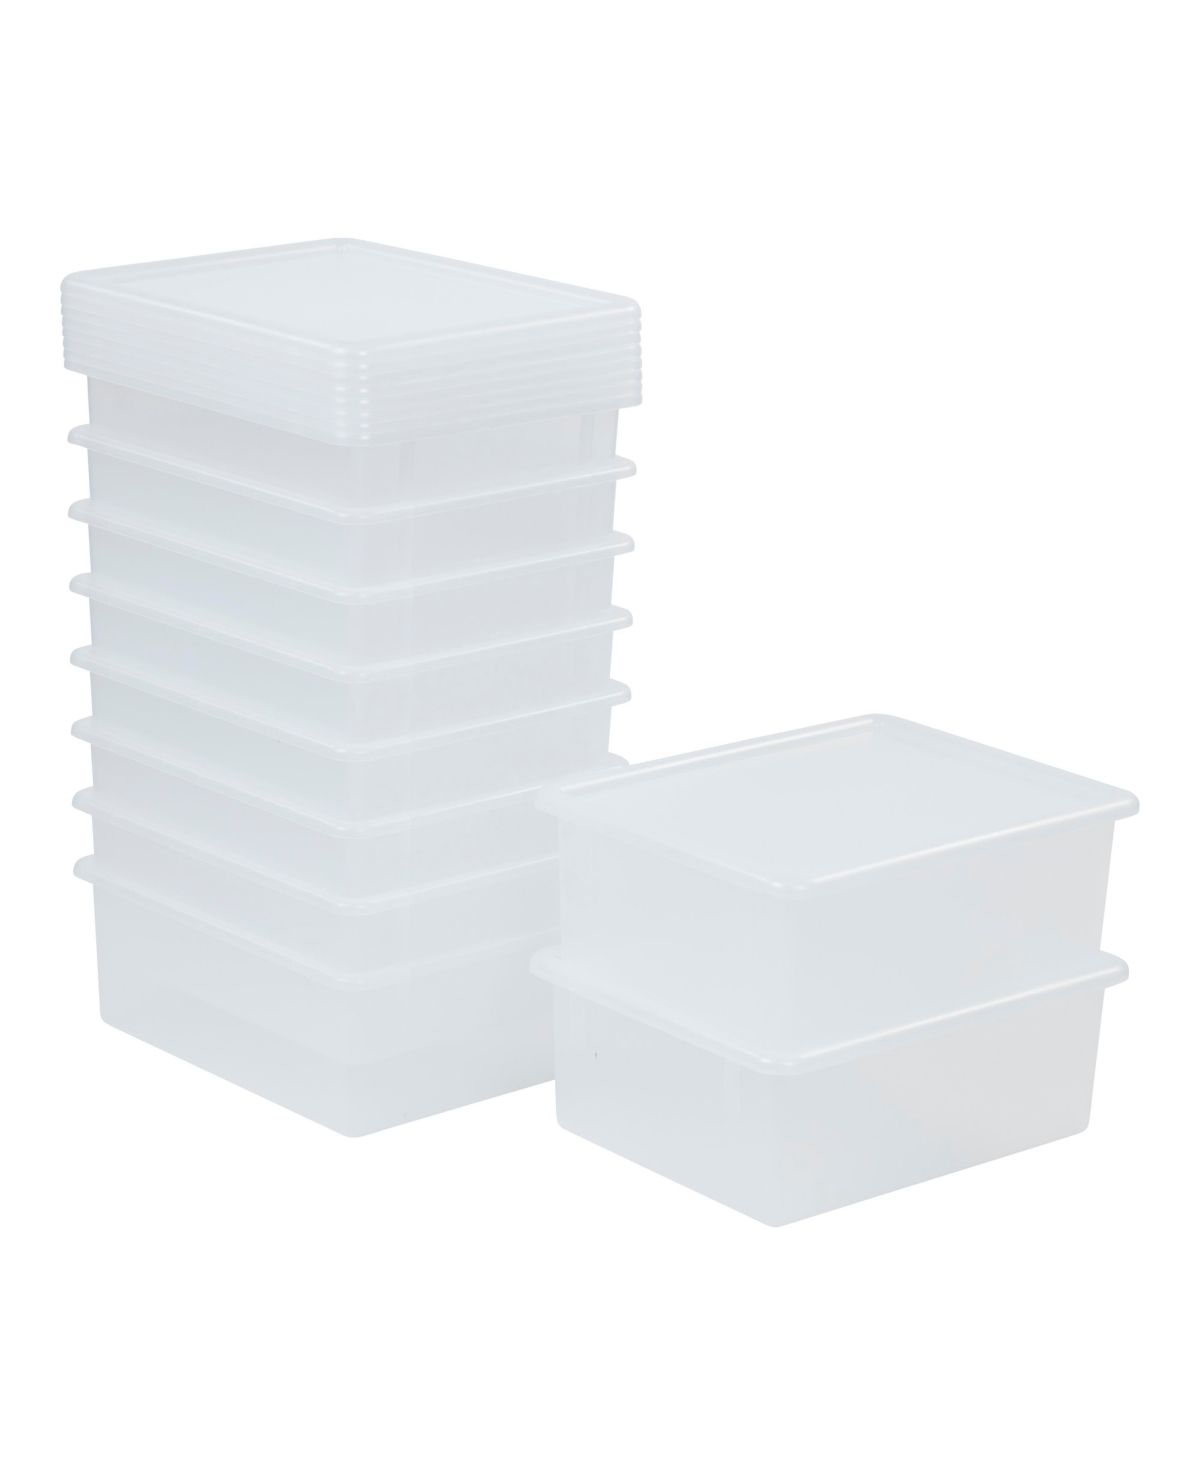 Letter Size Tray with Lid, Storage Containers, 10-Pack - Light grey